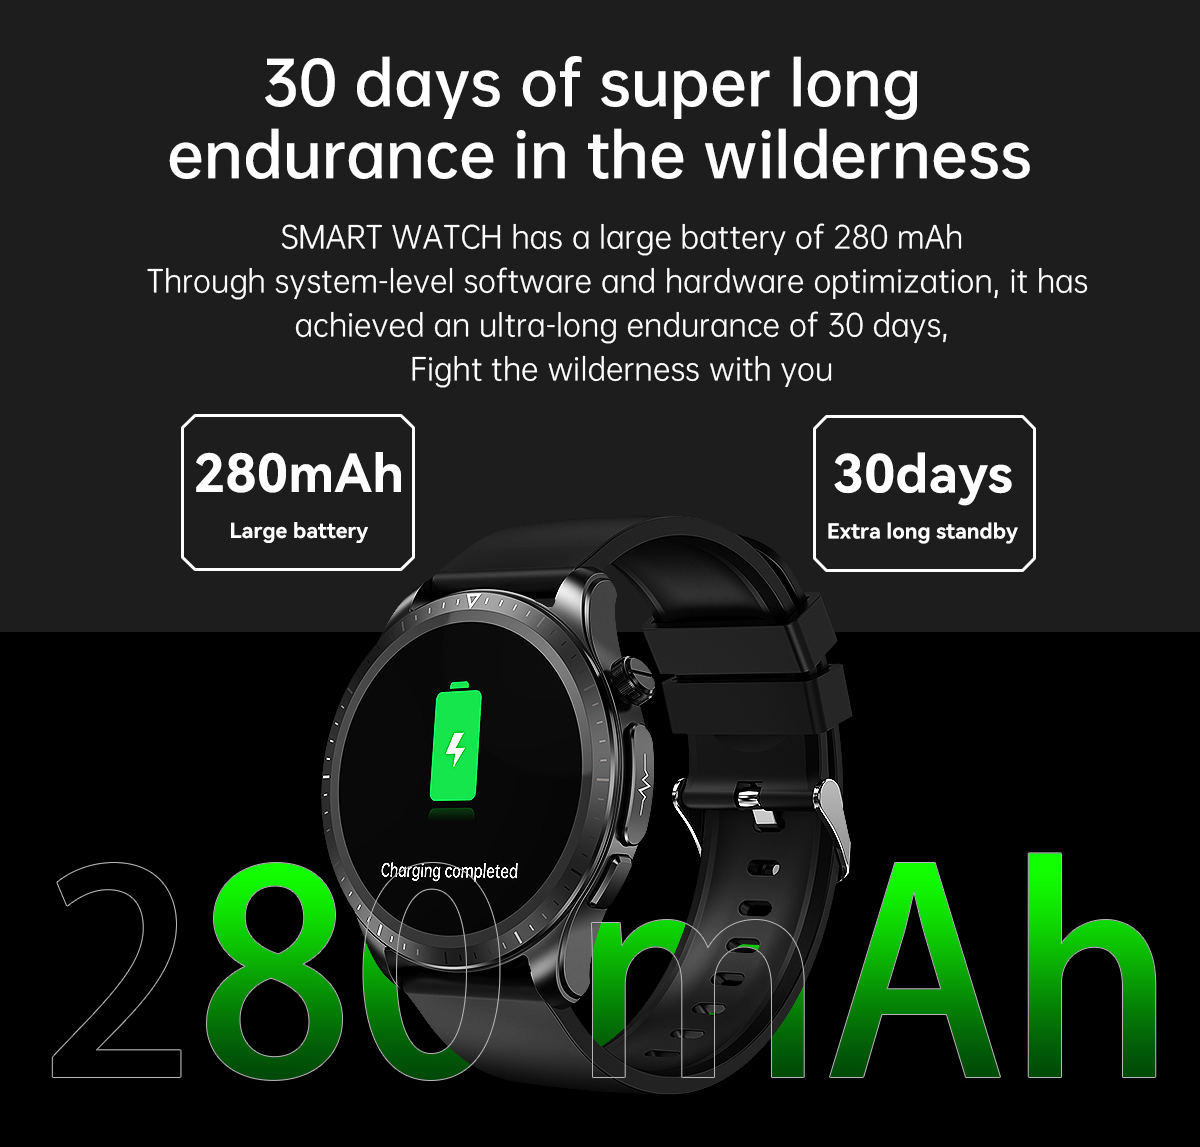 E420 Medical ECG Blood Glucose Health Smart Watch With Band And Patch